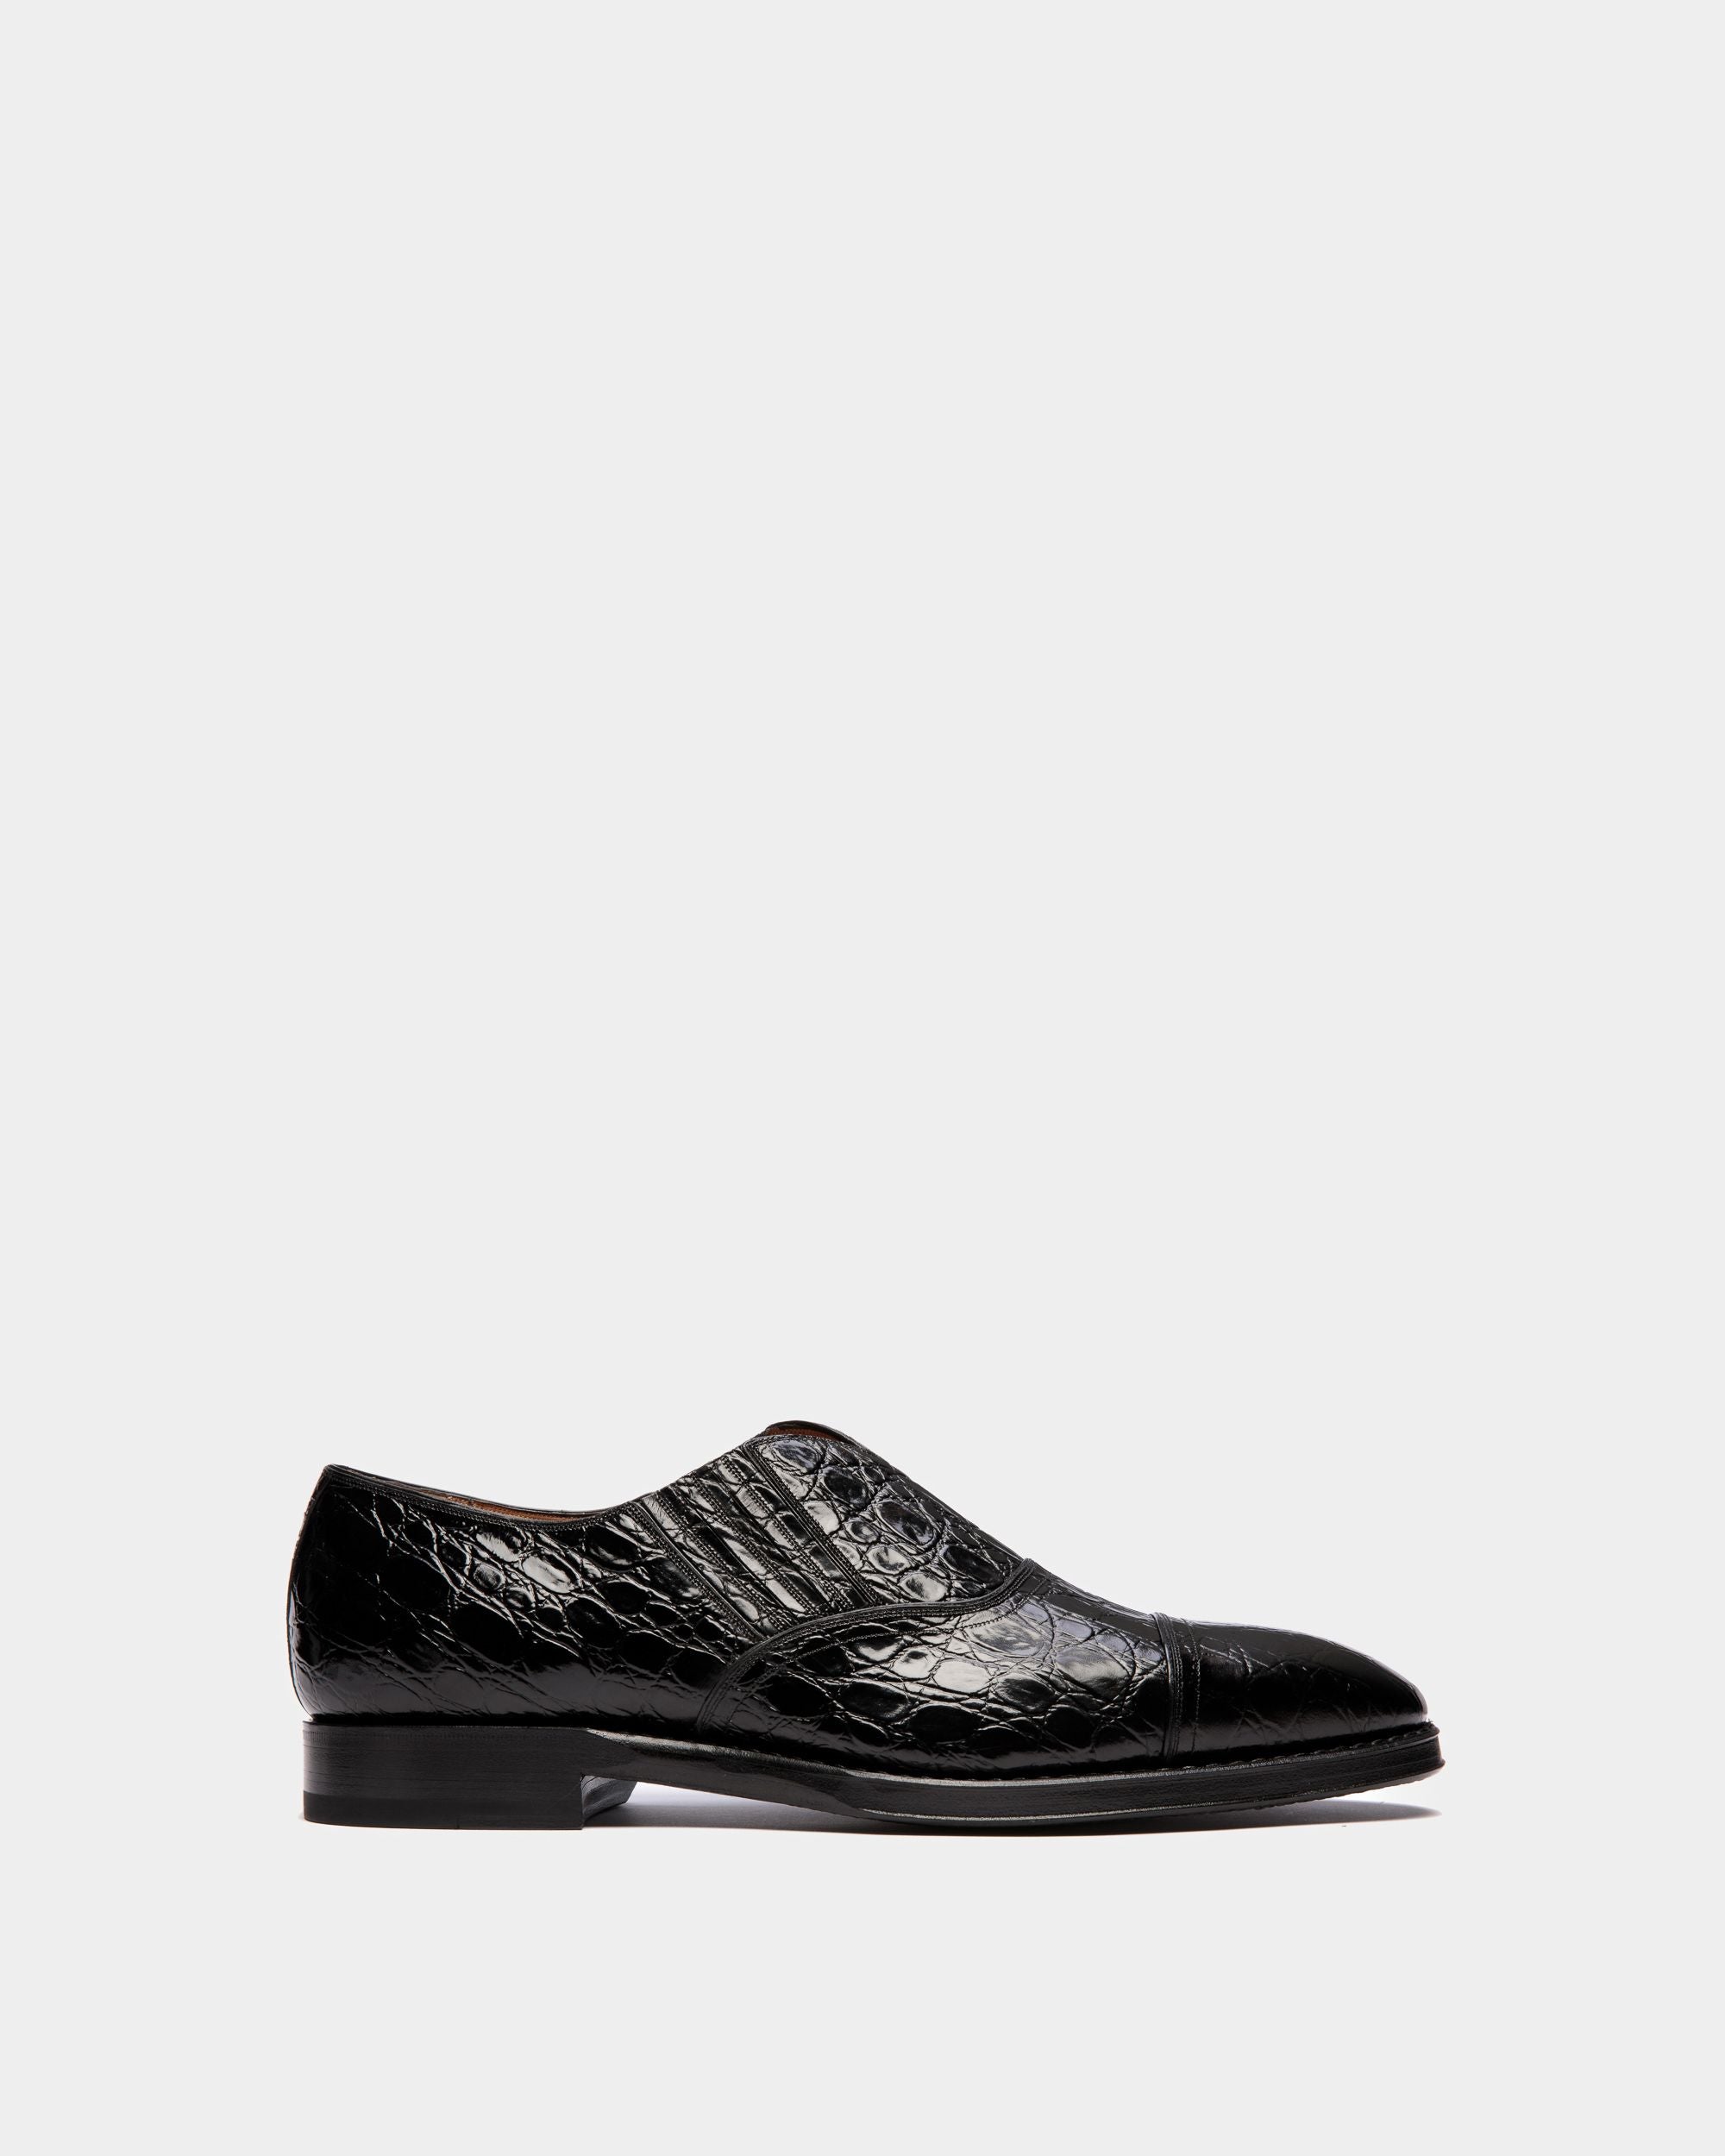 Men's Scribe Loafer in Black Printed Leather | Bally | Still Life Side